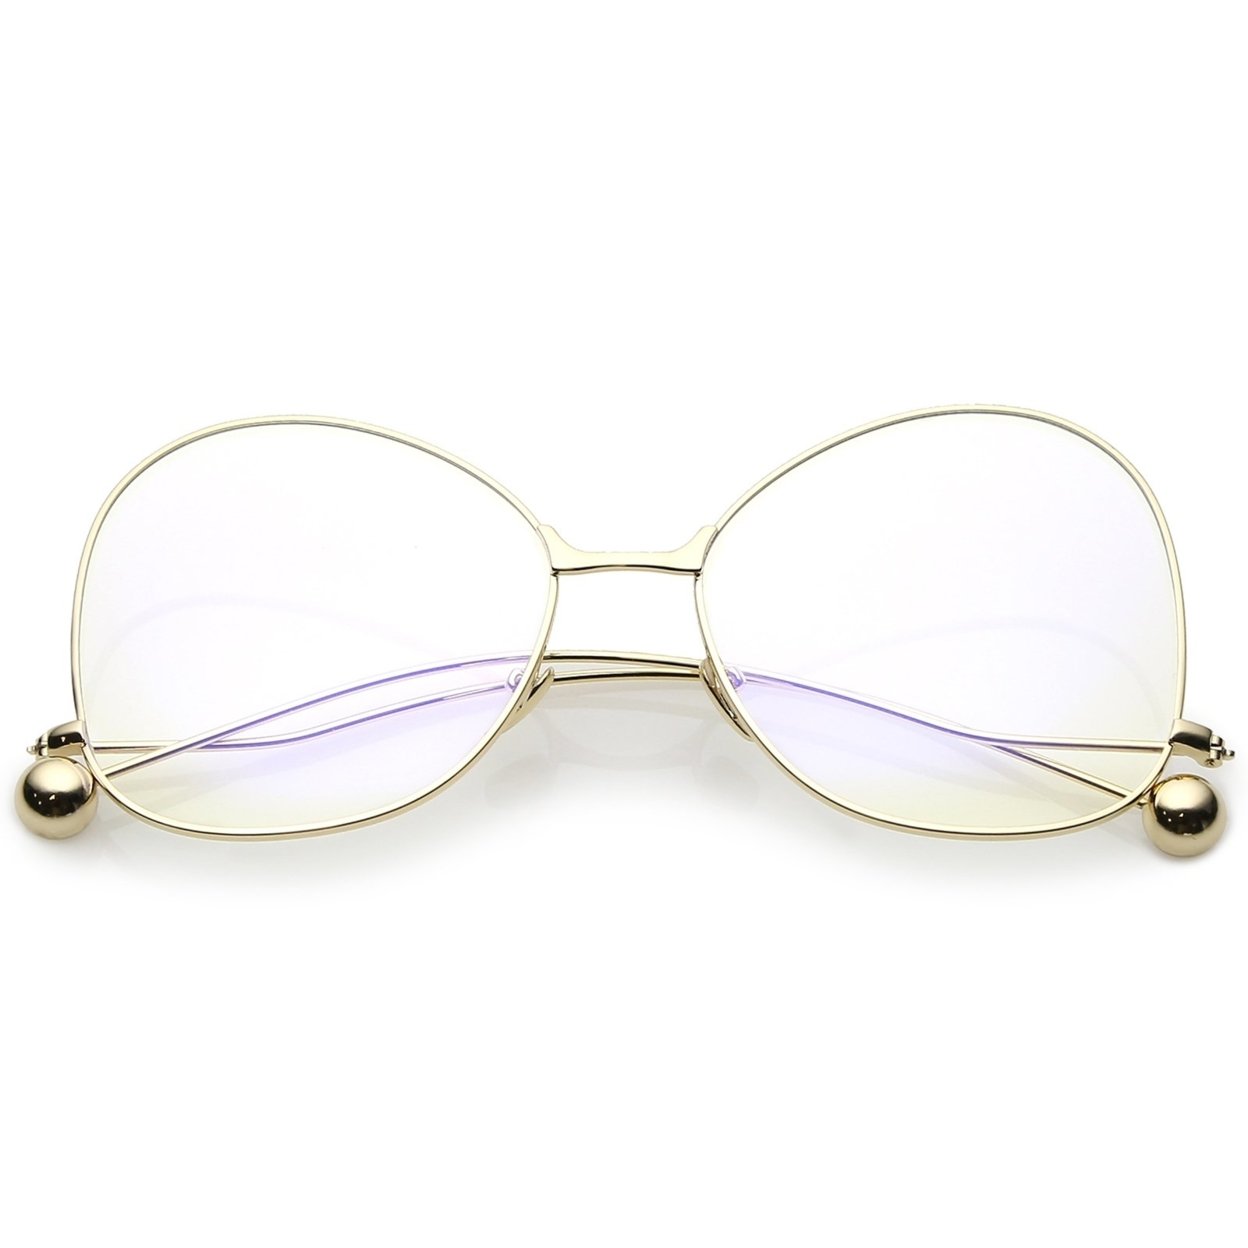 Oversize Butterfly Glasses With Clear Lenses And Thin Metal Arms With Ball Accents - Silver / Clear